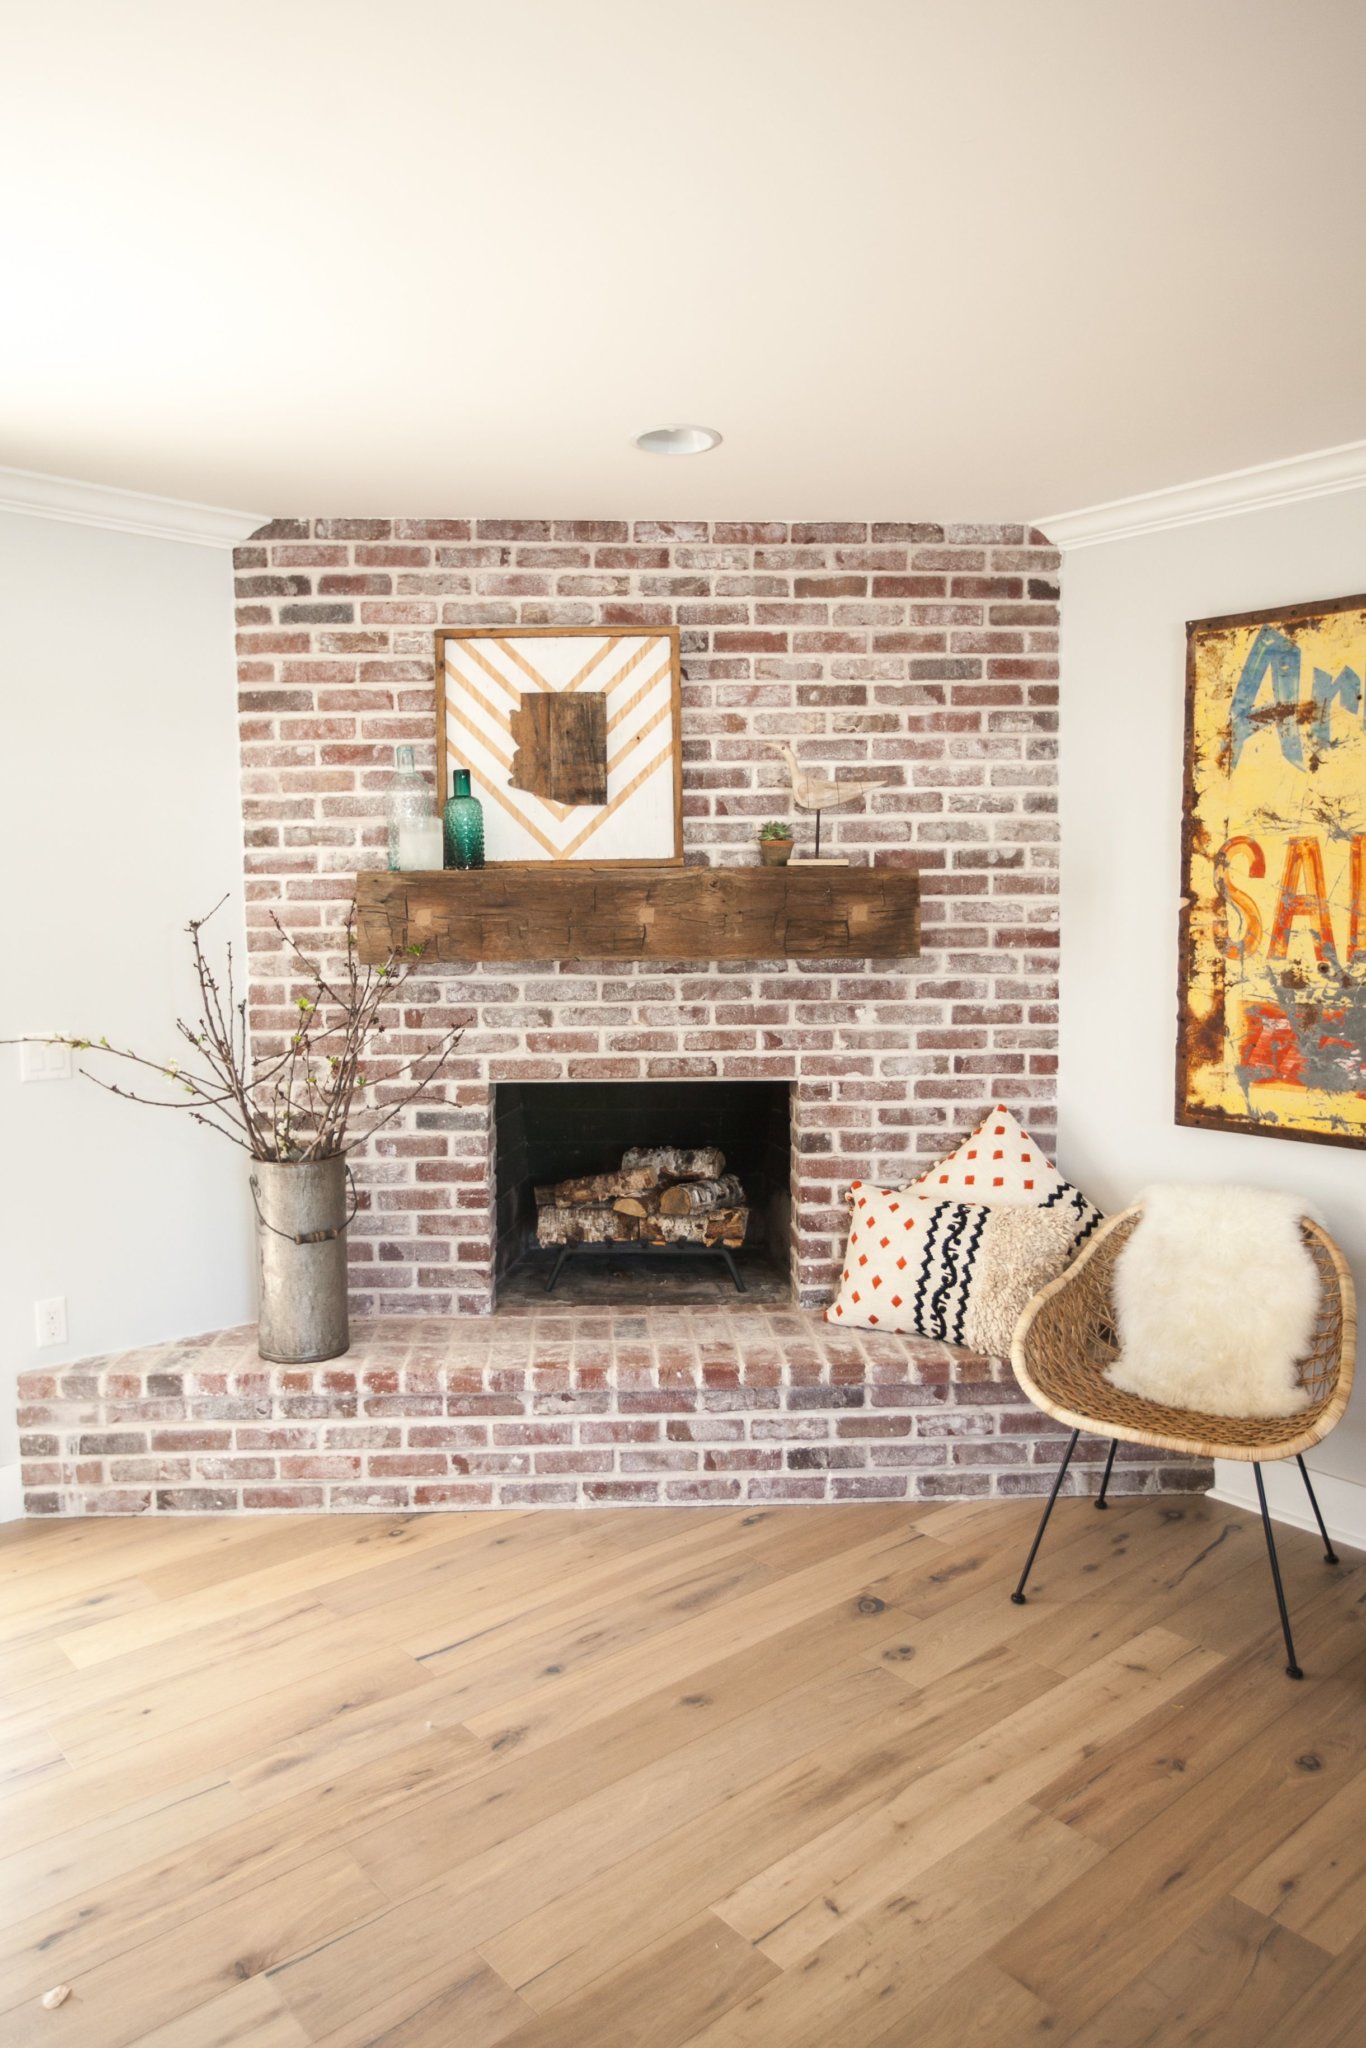 Stunning Brick Fireplace Designs that Add Cozy Style to any Home - Antique Brick Fireplace 89566 1366x2048